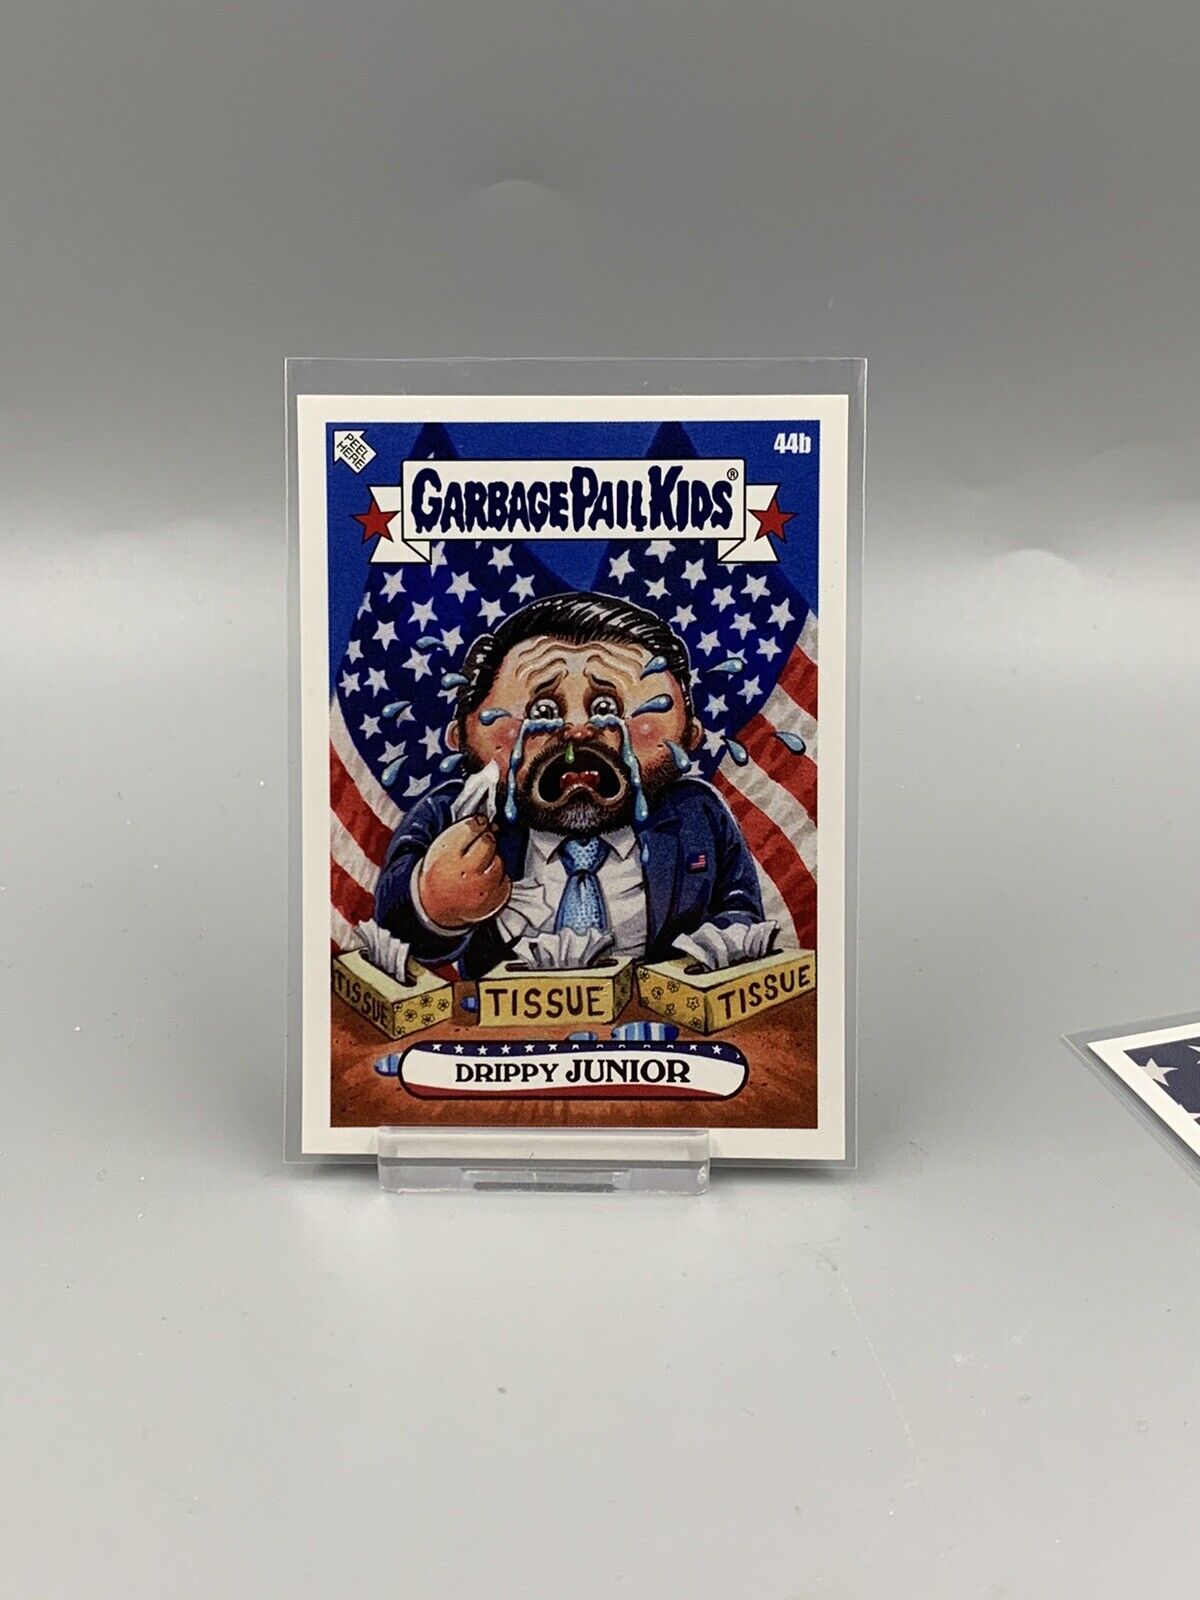 2020 TOPPS GPK Disgrace Debate Convention 44AB - Teary Eyed Don & Drippy Junior